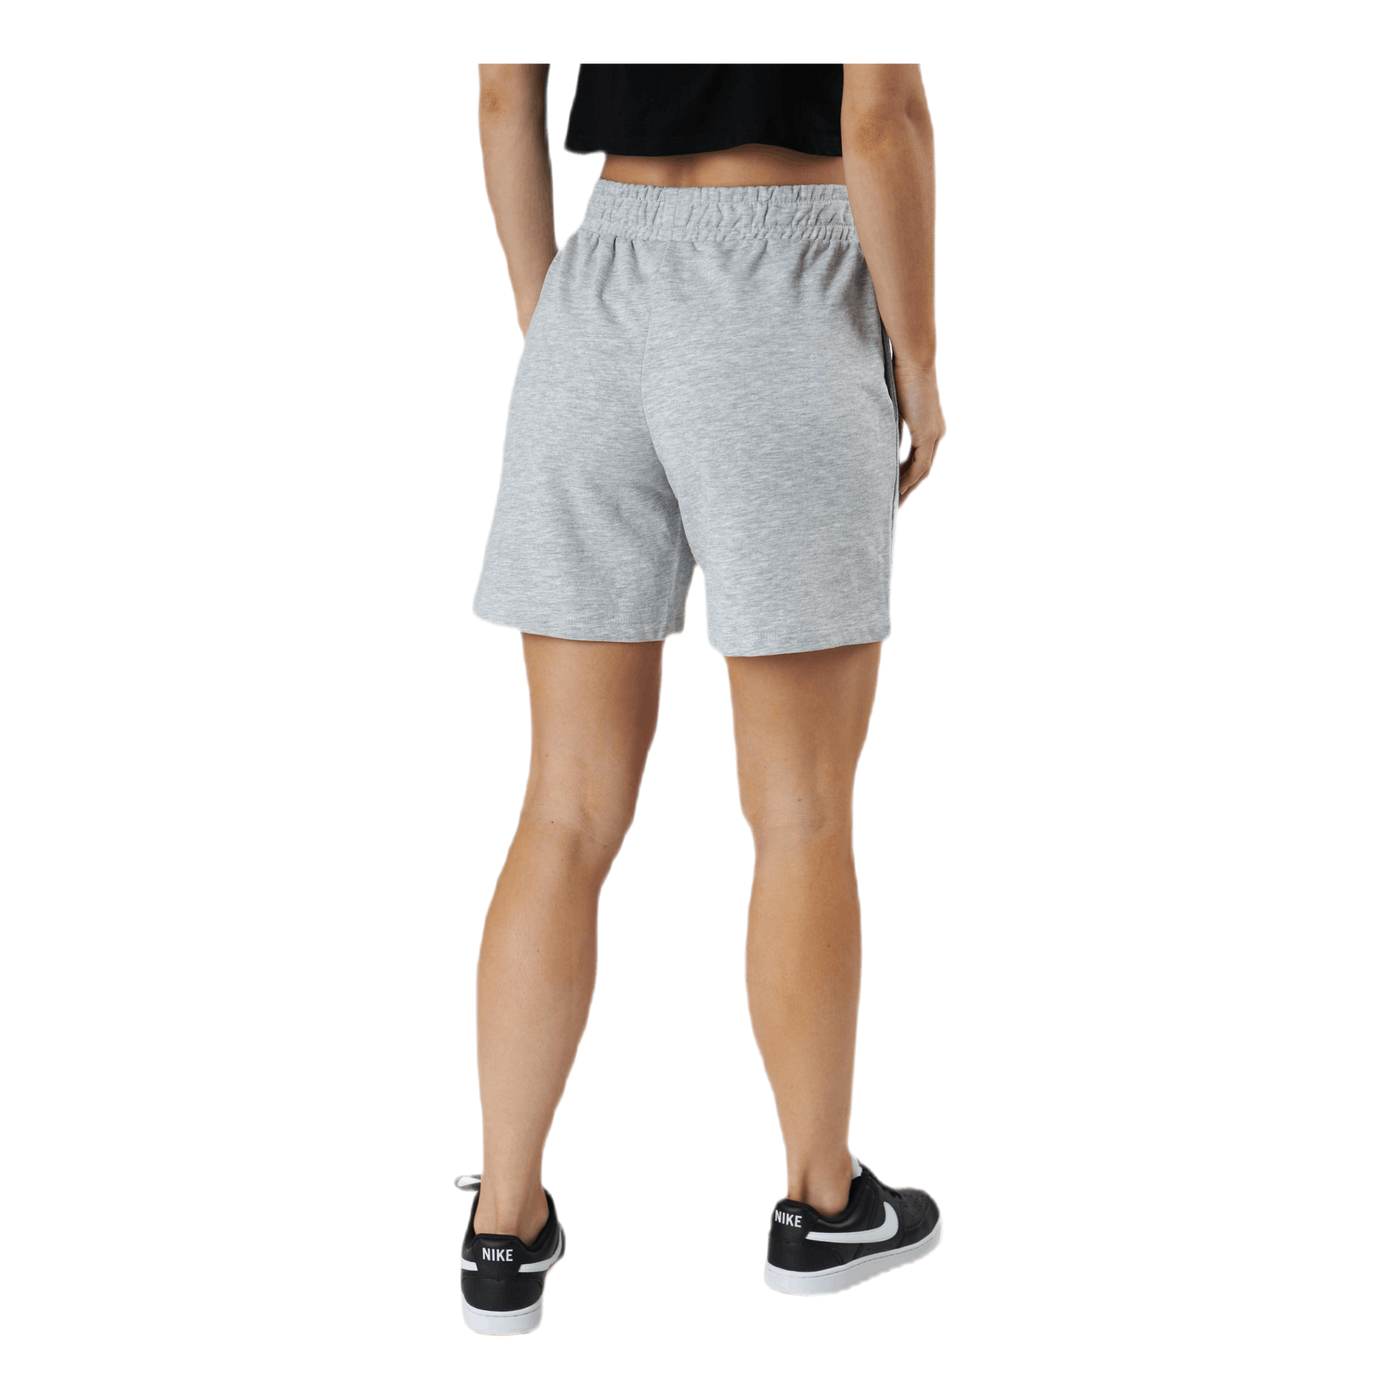 Issi Life Shorts Swt Grey